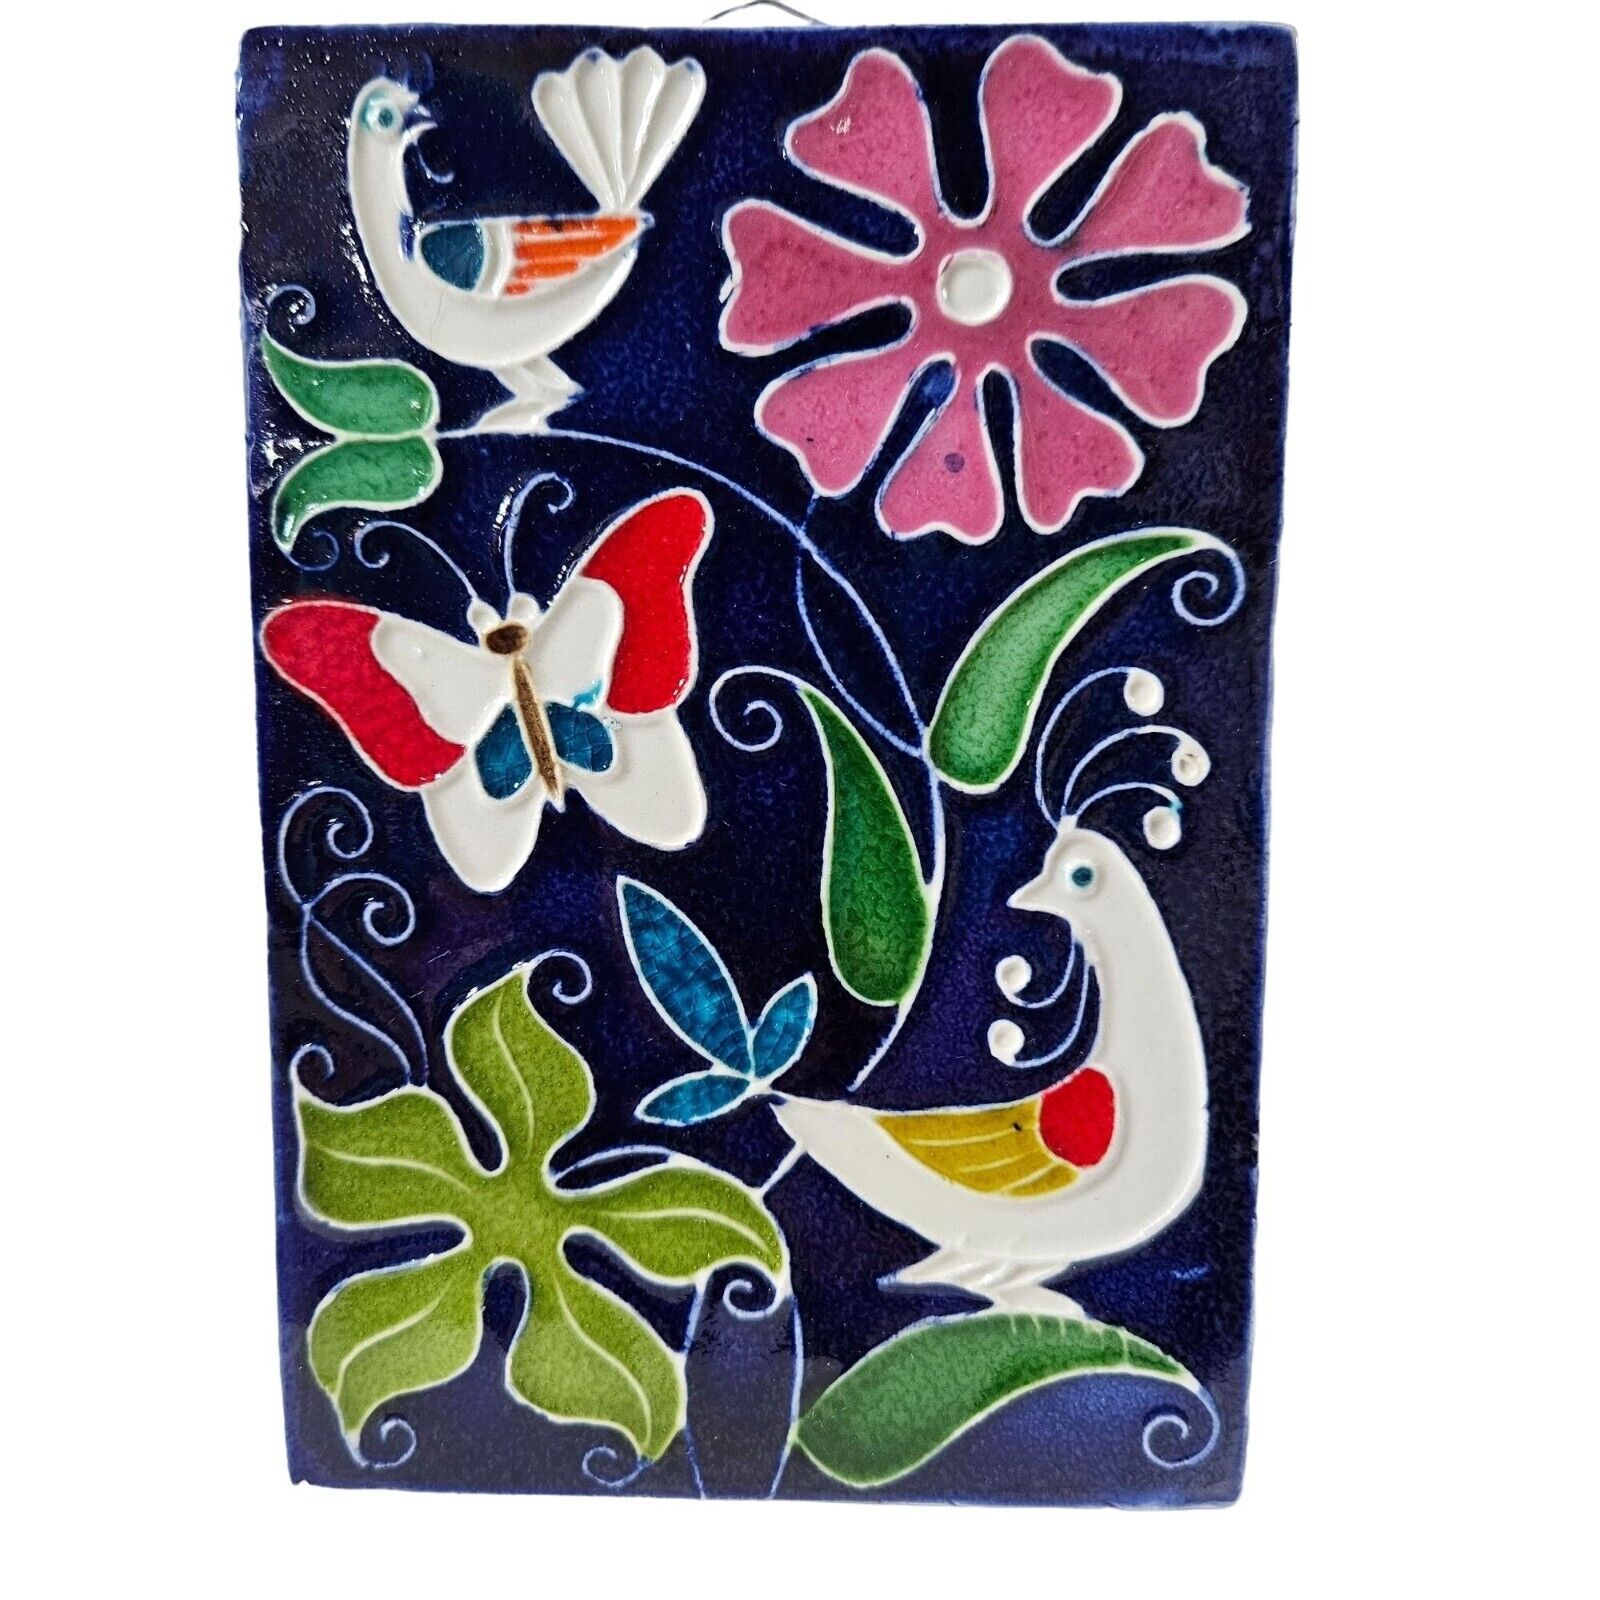 Creazioni Luciano Tile Italy Hand Painted Colorful Birds Flowers Butterfly